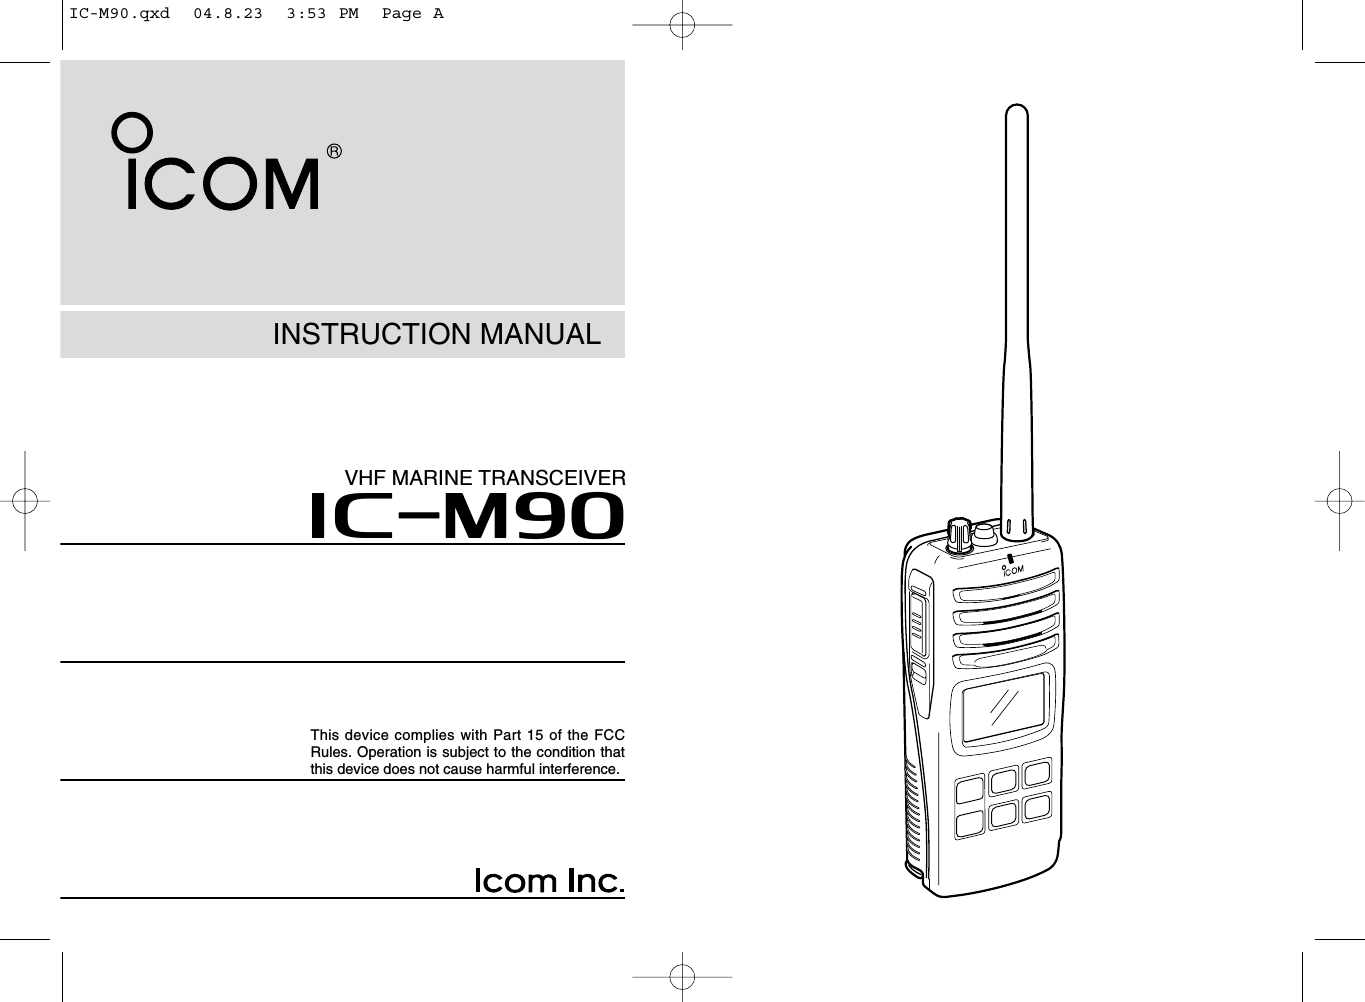 INSTRUCTION MANUALiM90VHF MARINE TRANSCEIVERThis device complies with Part 15 of the FCCRules. Operation is subject to the condition thatthis device does not cause harmful interference.IC-M90.qxd  04.8.23  3:53 PM  Page A